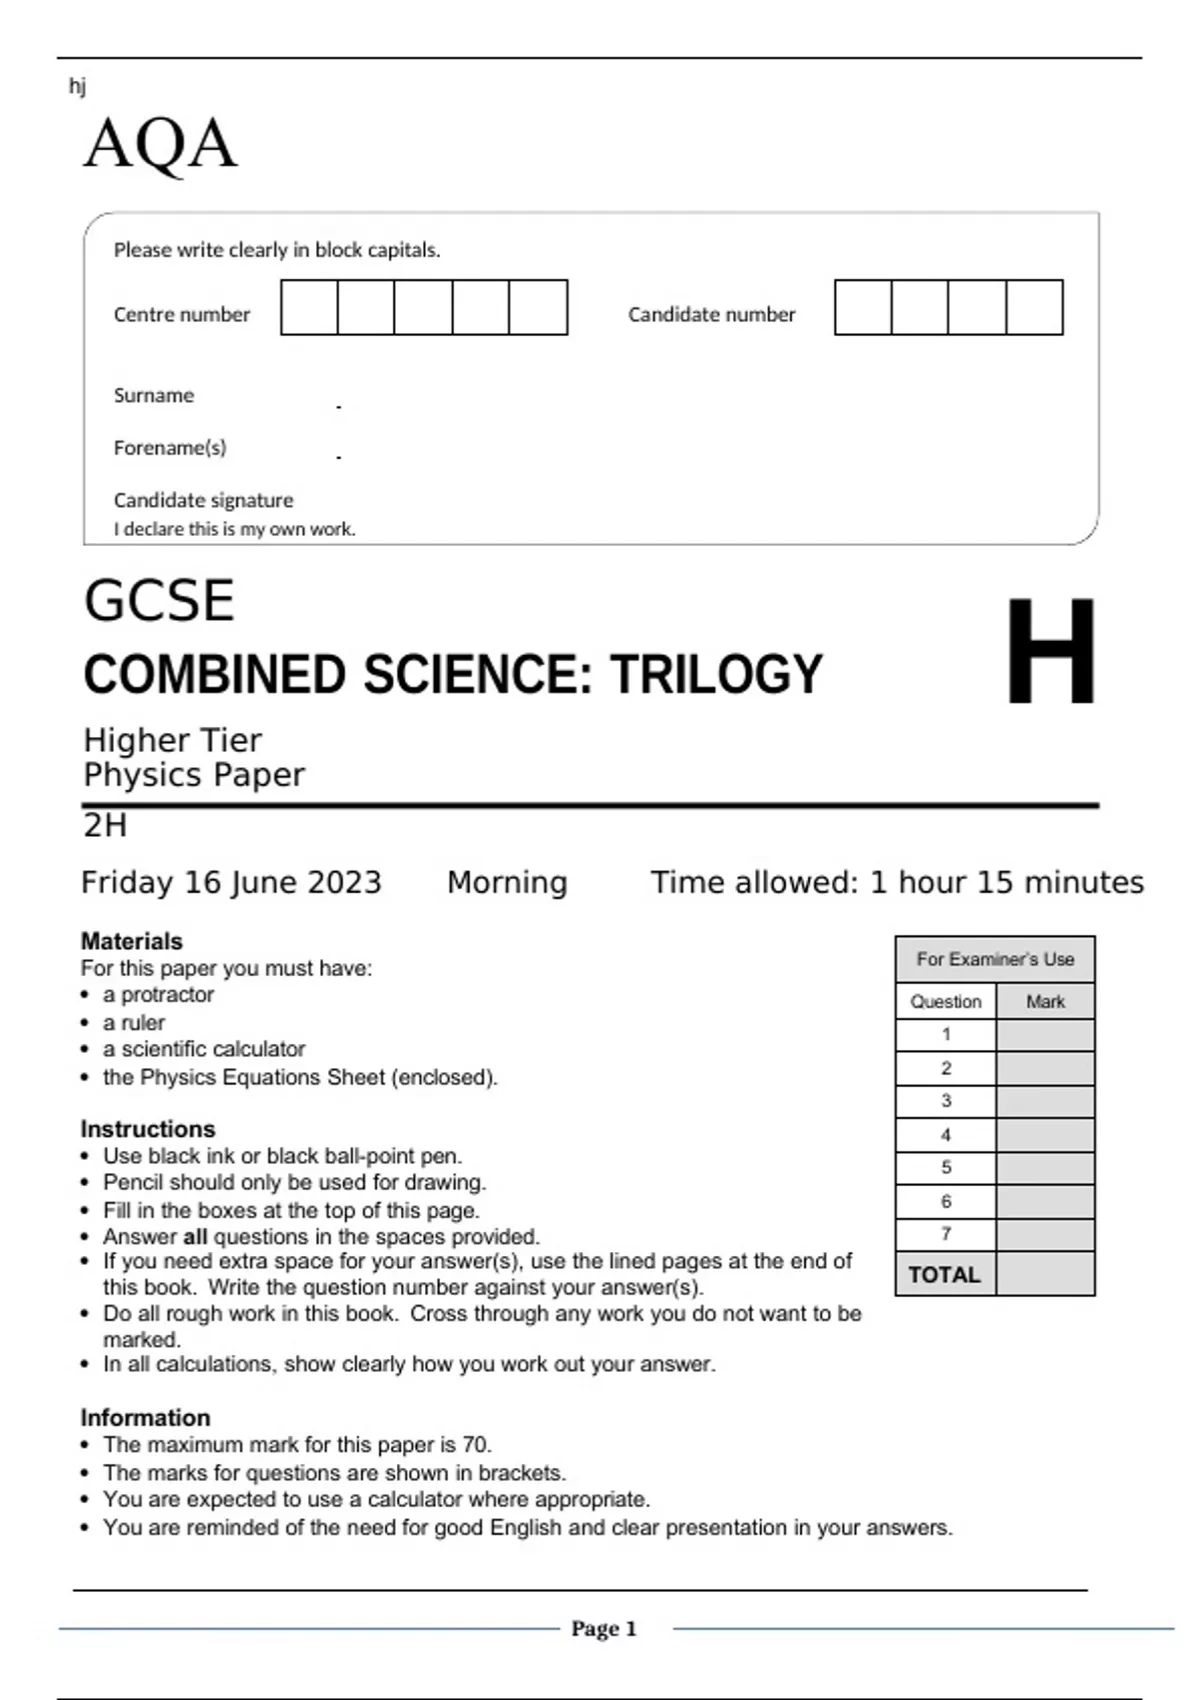 Aqa Gcse Combined Science Trilogy Higher Tier Physics Paper 2h June 2023 Combined Science 2549